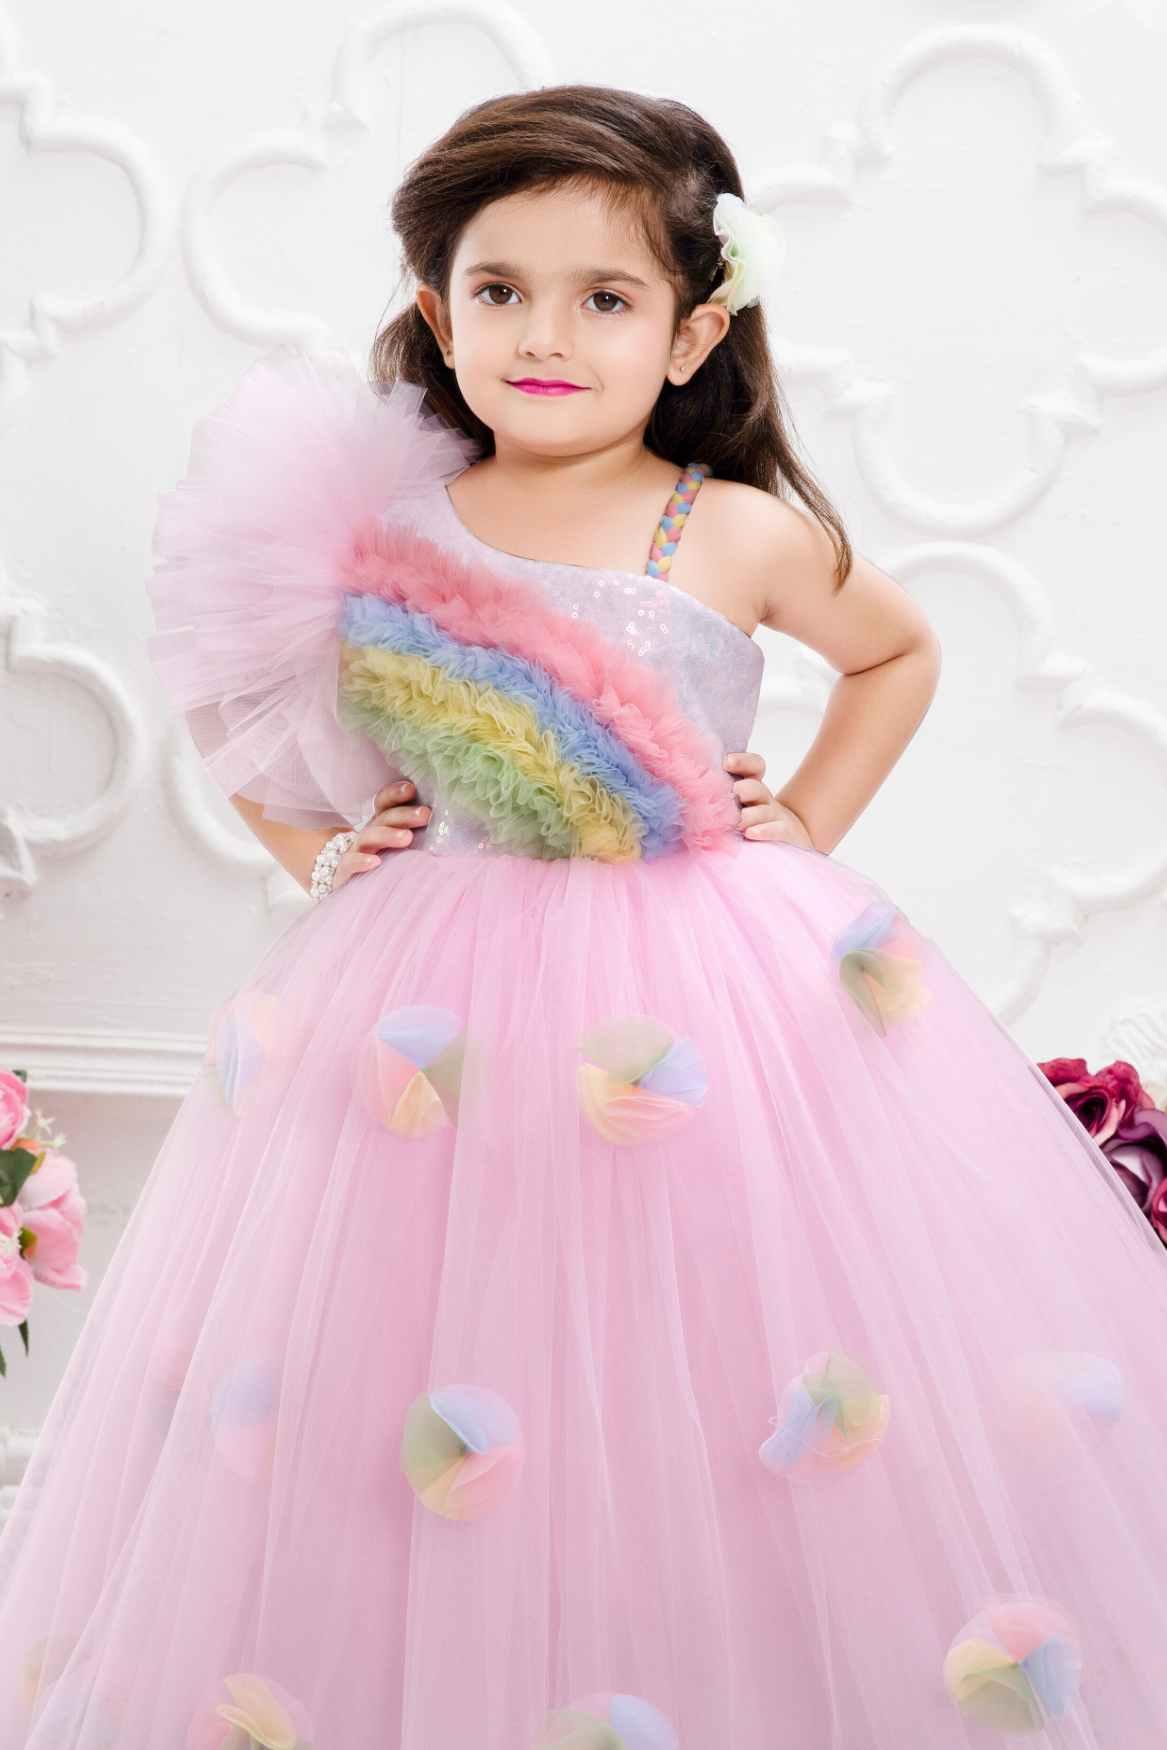 Pink Net Gown With Rainbow Pattern Ruffle Design For Girls - Lagorii Kids